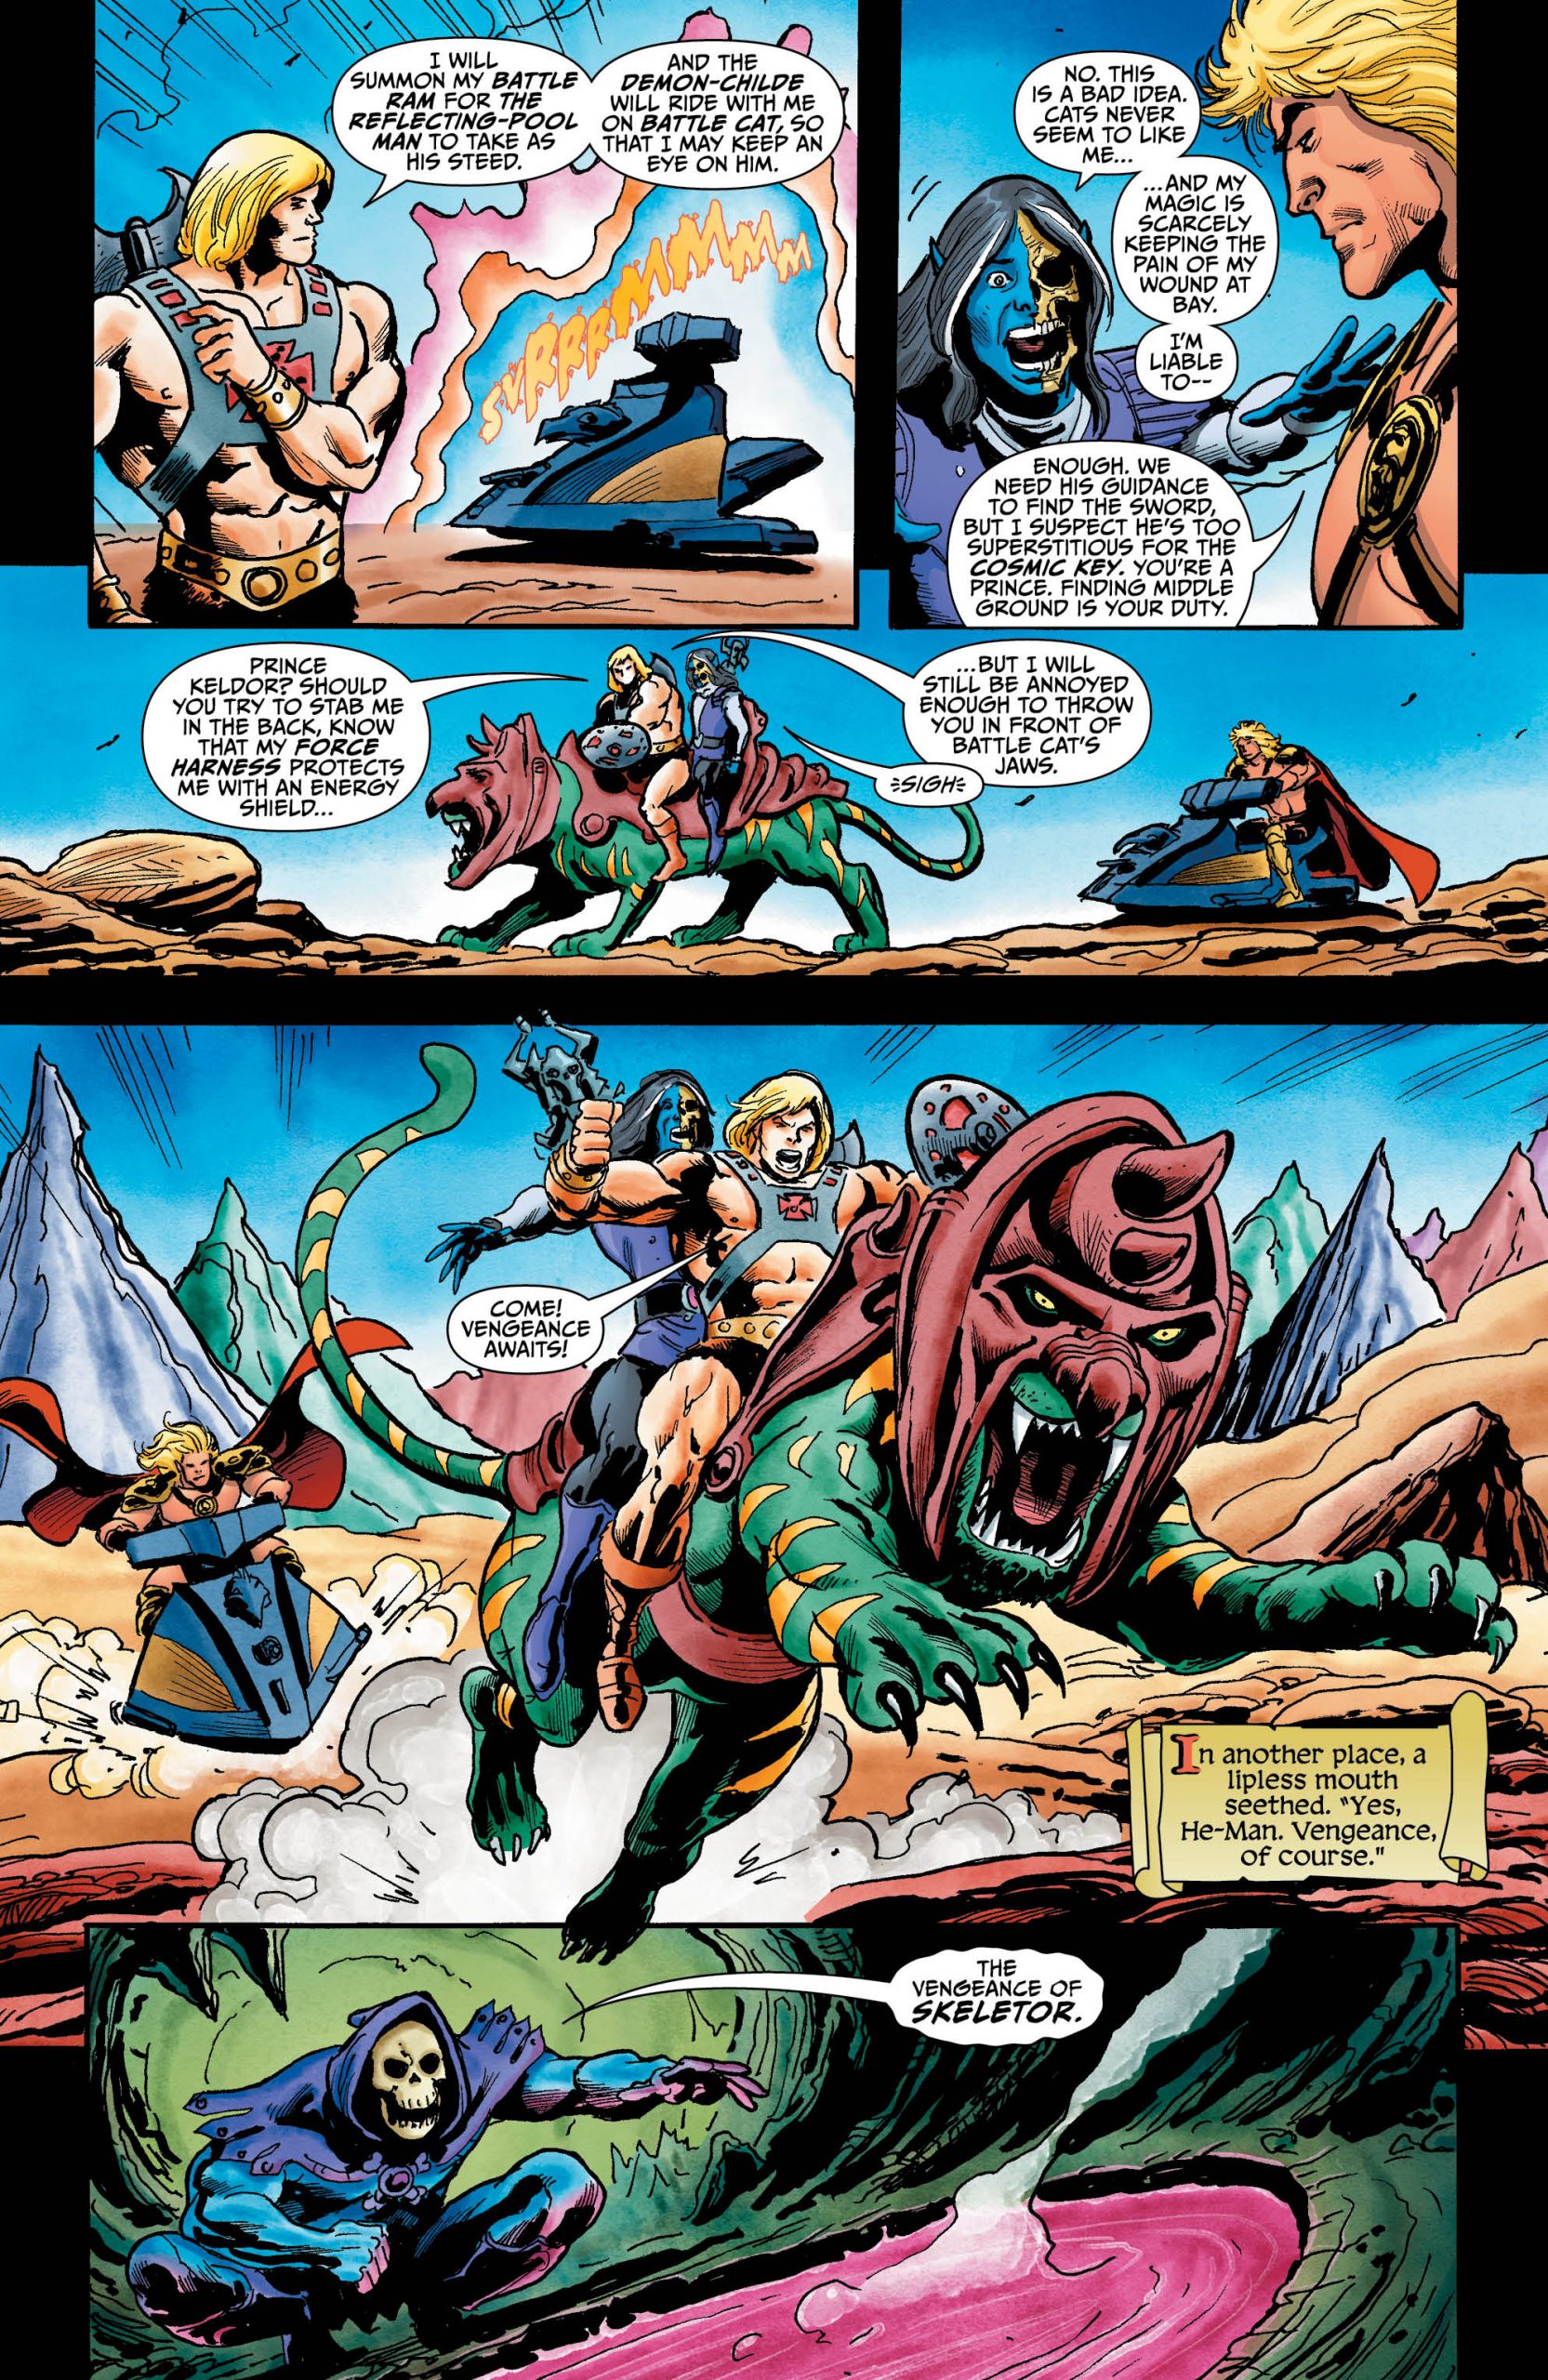 He-Man and the Masters of the Multiverse #5